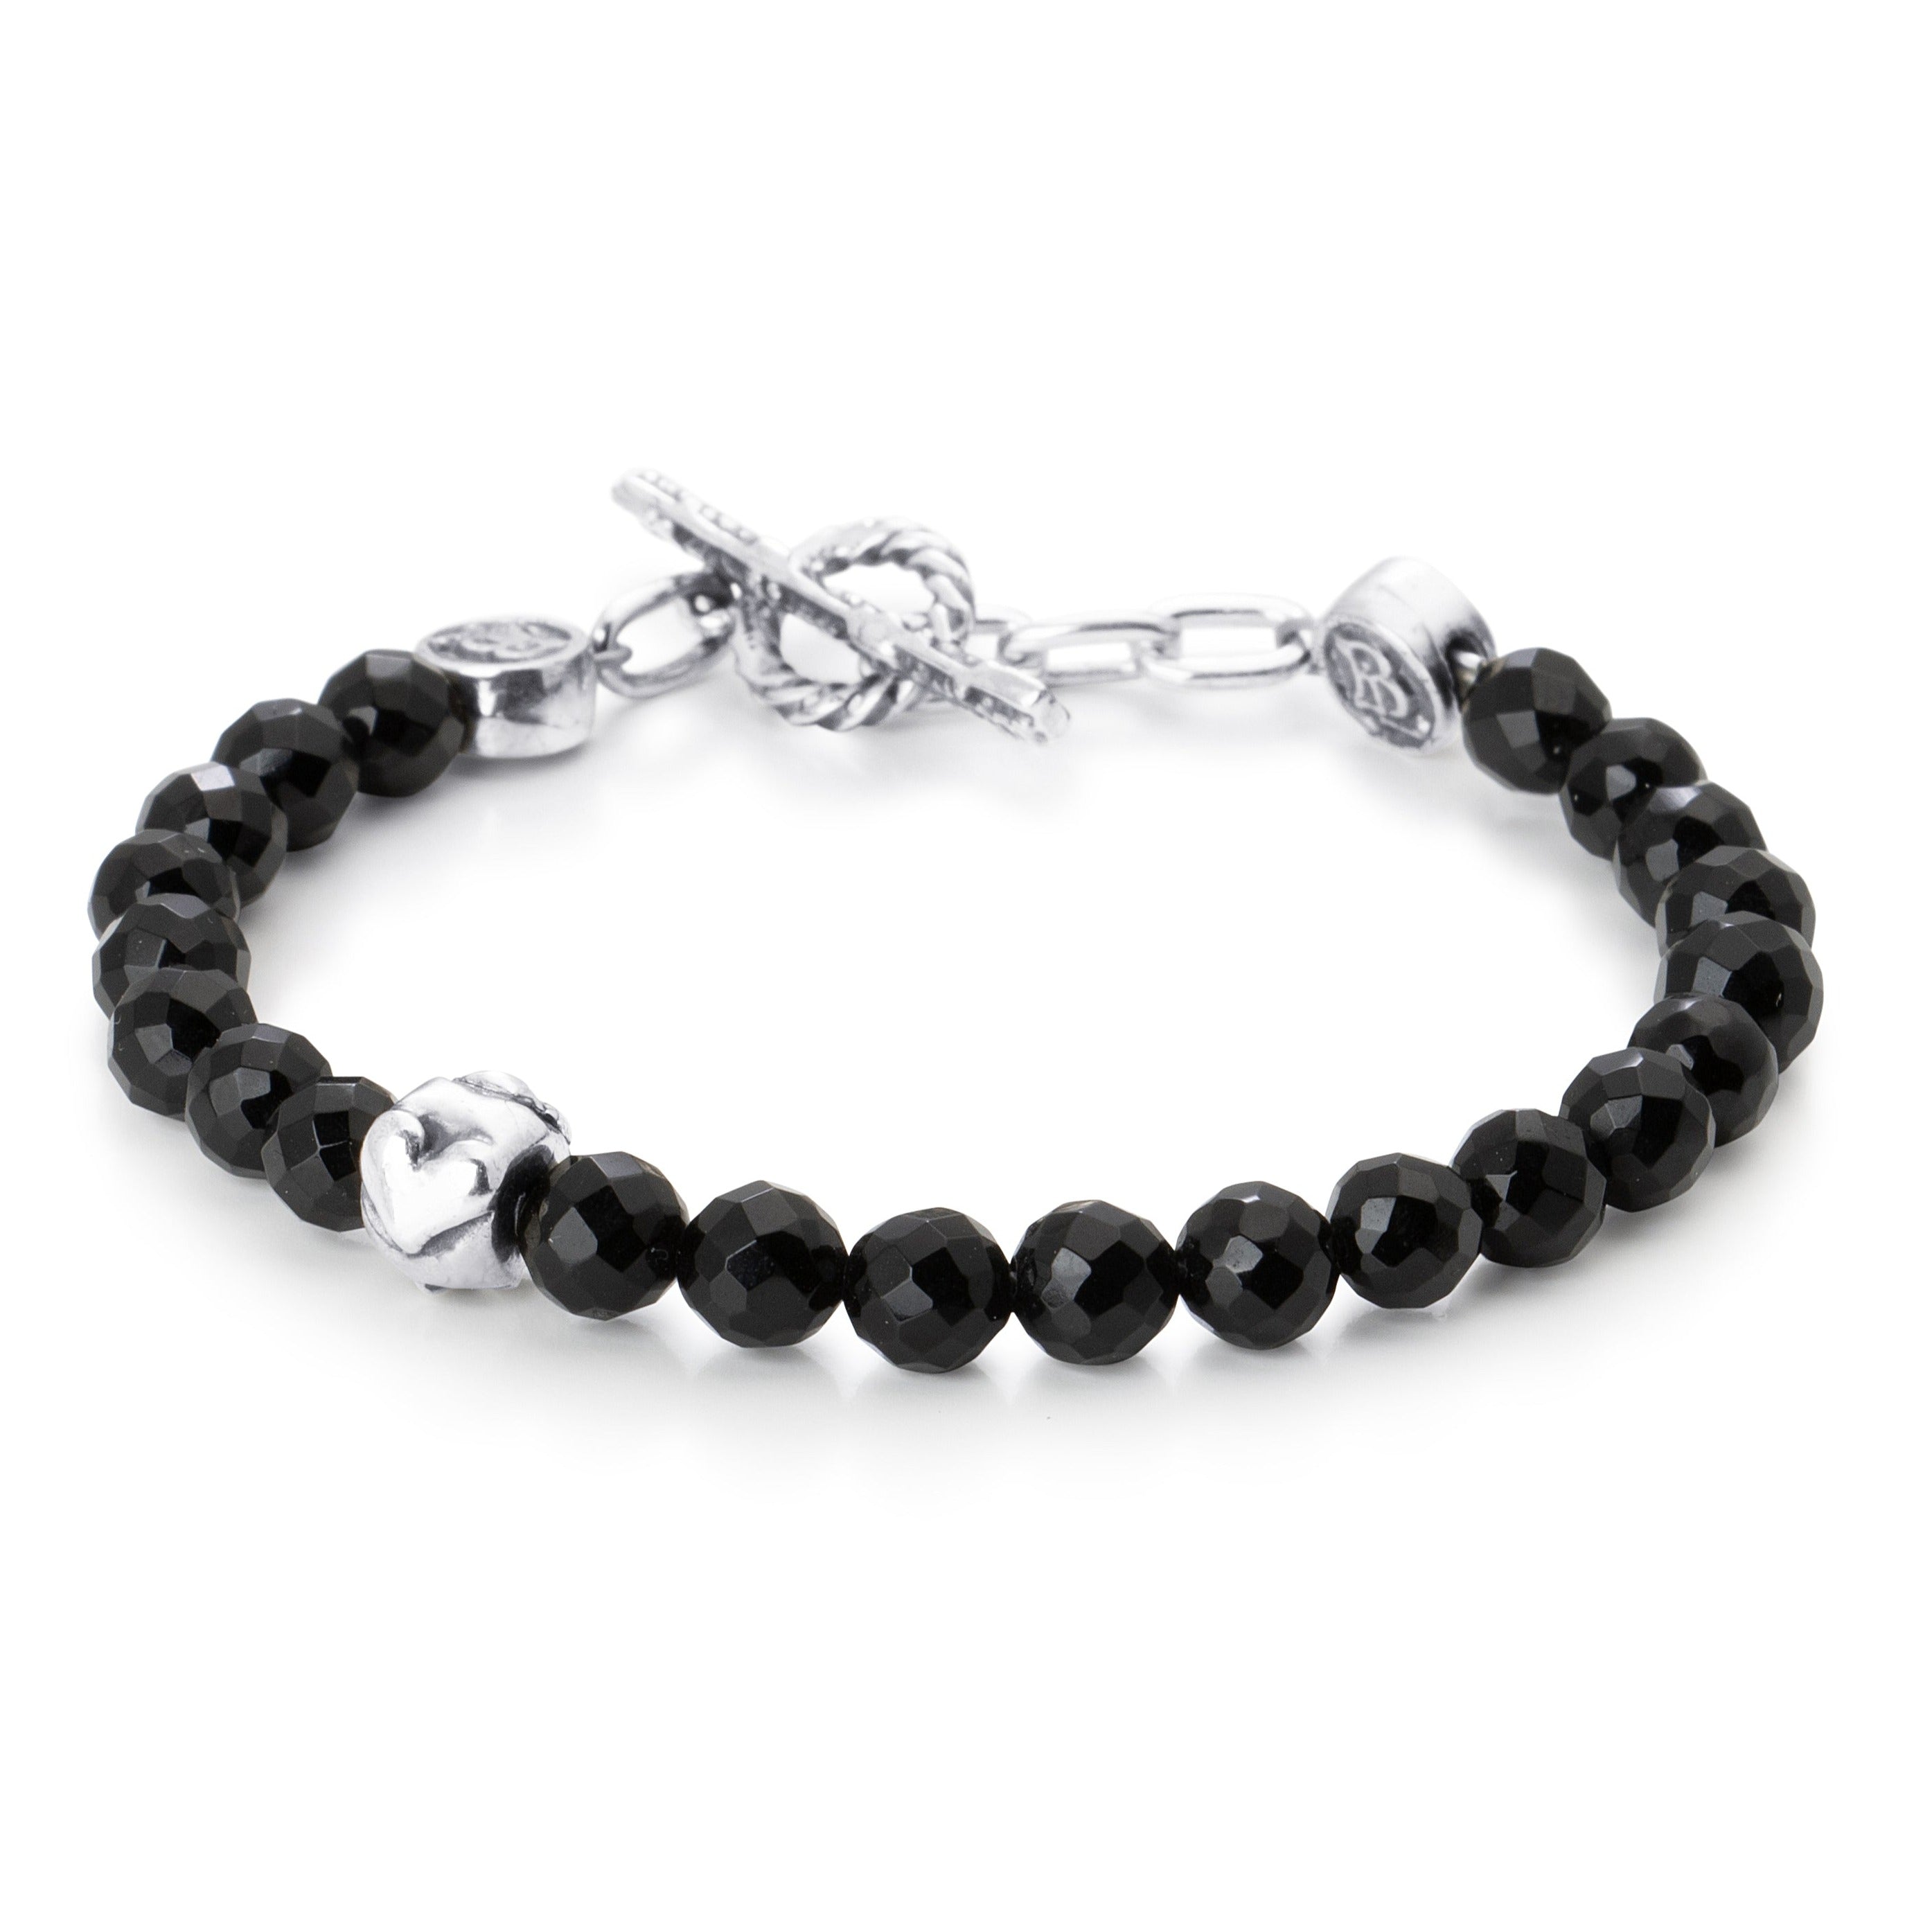 Facetted Onyx beads paired with a single sterling silver bead engraved with a heart star and skull on a stainless steel cable with Sterling silver T clasp.